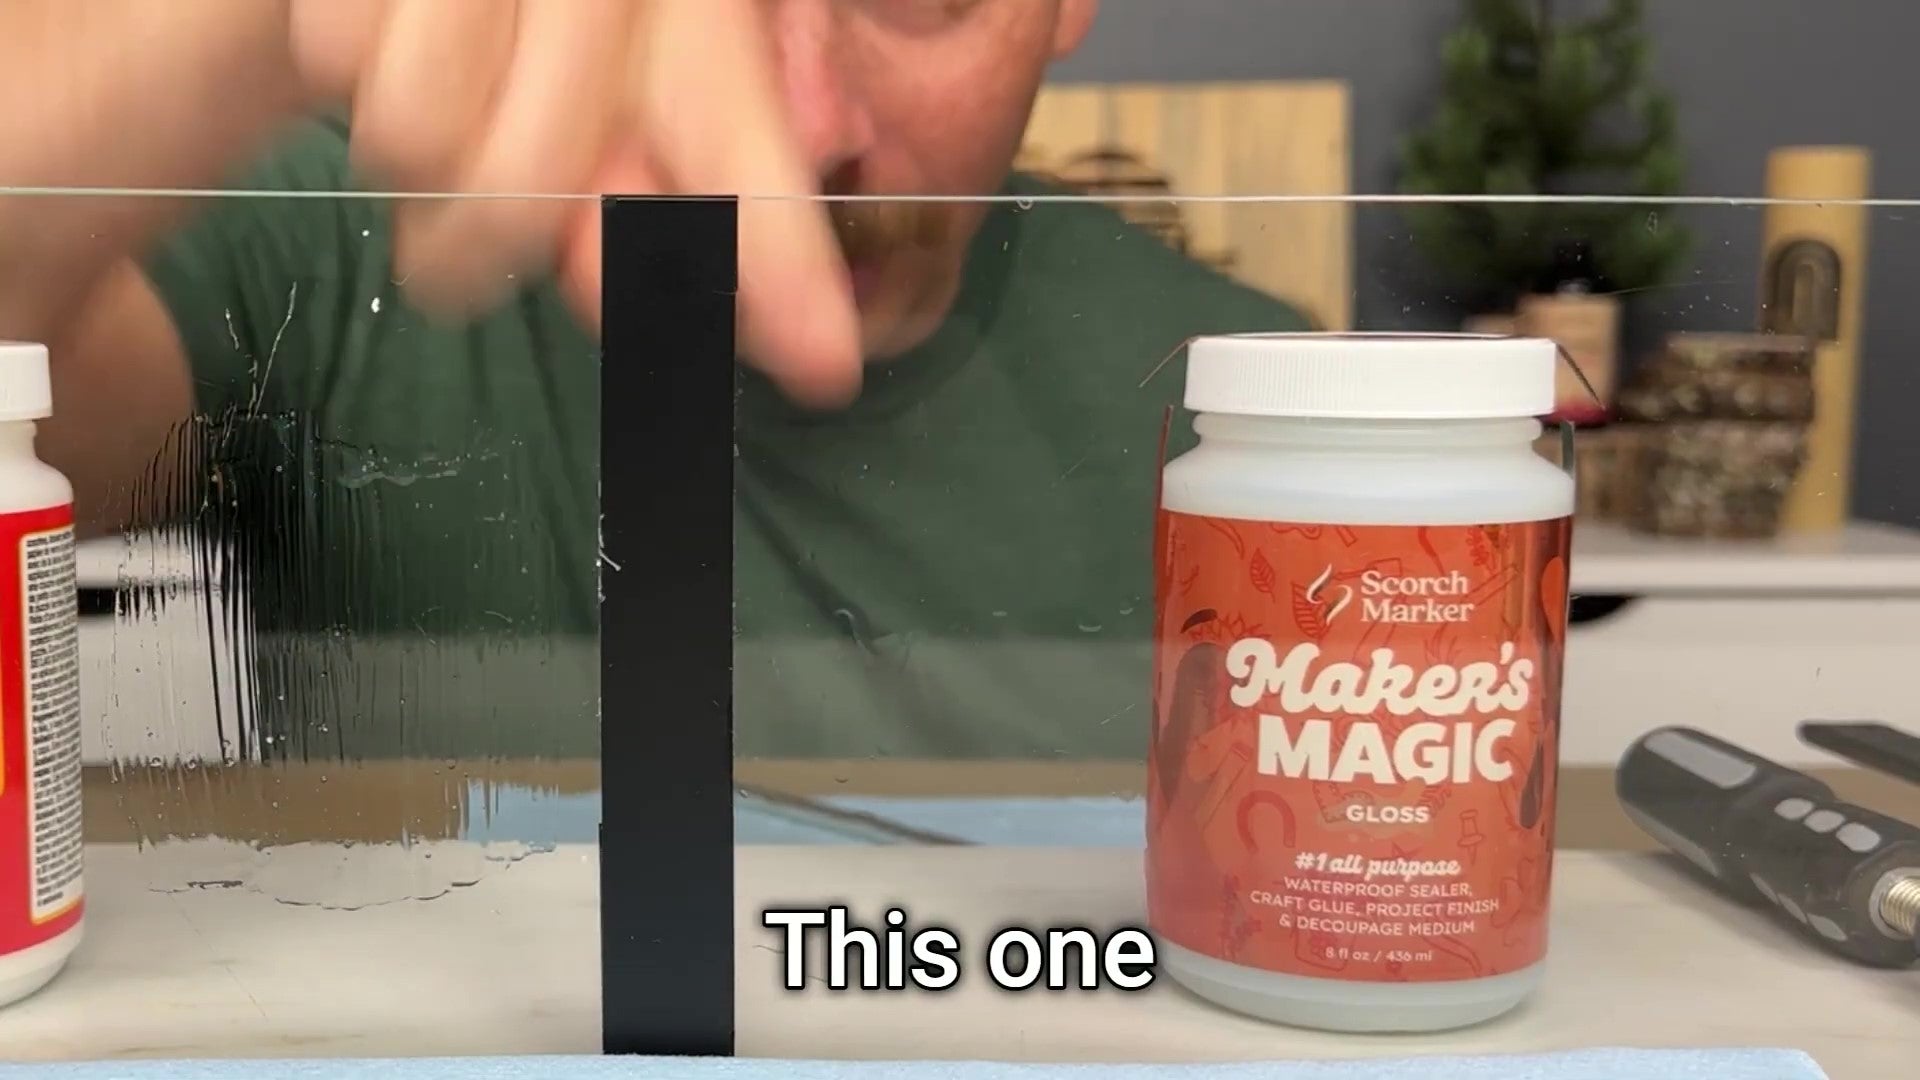 How to Prevent Brush Strokes & Bubbles with Maker's Magic - Scorch Marker